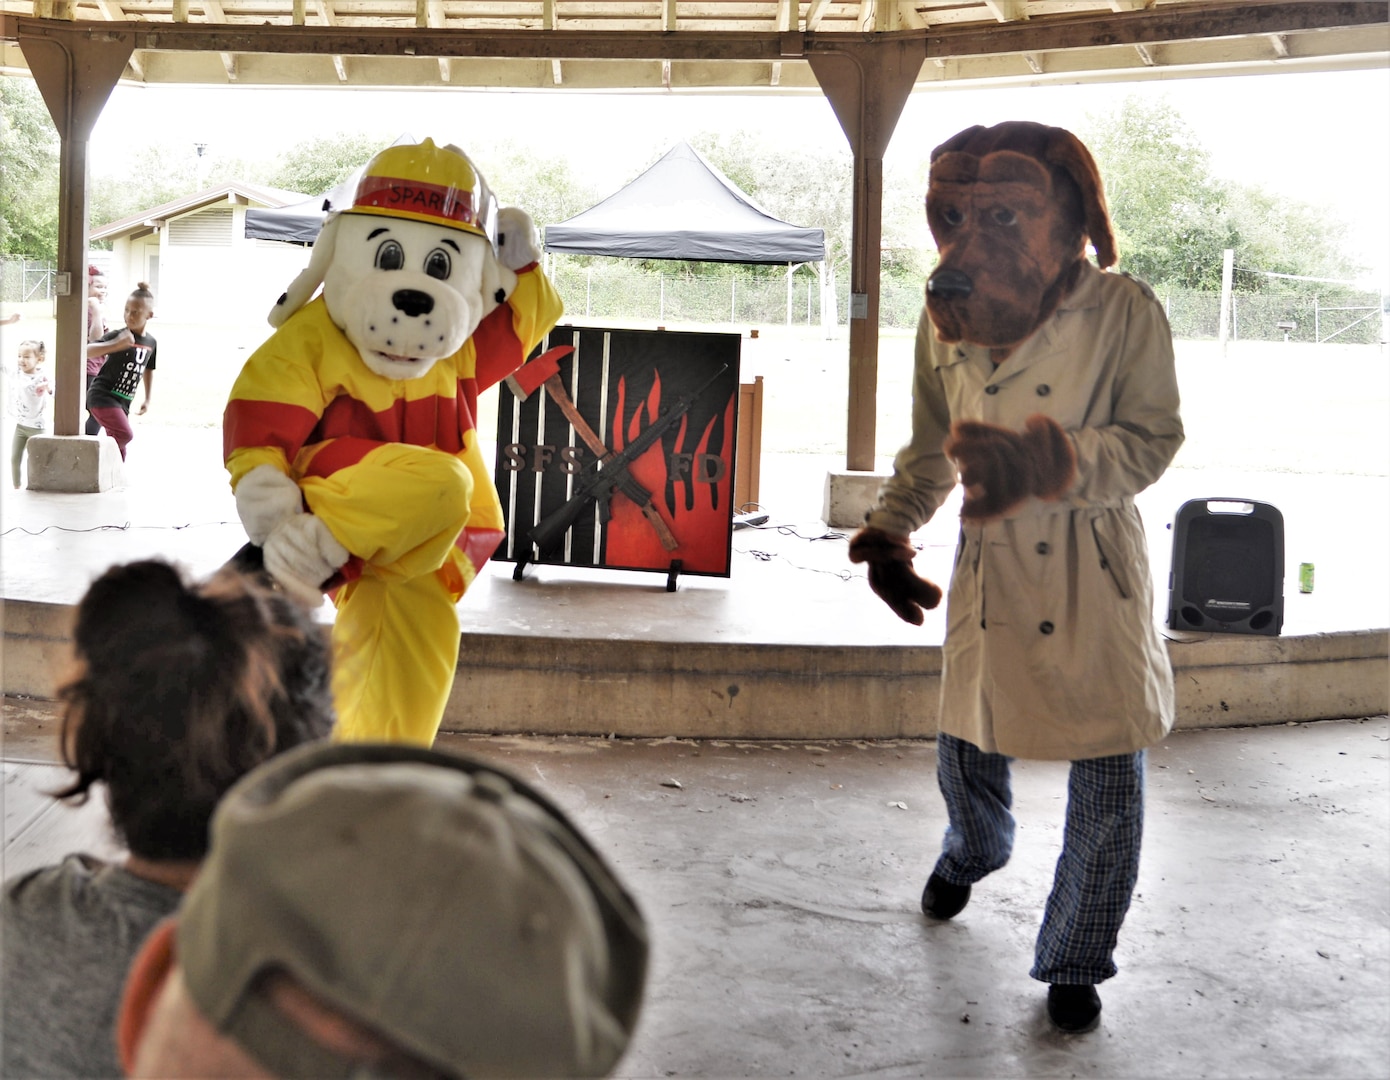 Sparky the Firedog and McGruff the Crime Dog compete in a dance-off as part of the Oct. 20, 2018, during the final challenge of the 2018 Battle of the Badges at Joint Base San Antonio-Randolph. Battle of the Badges takes place each year to build camaraderie, espirit de corps and cohesion among JBSA first responders through various competitive challenges taken from their daily missions.